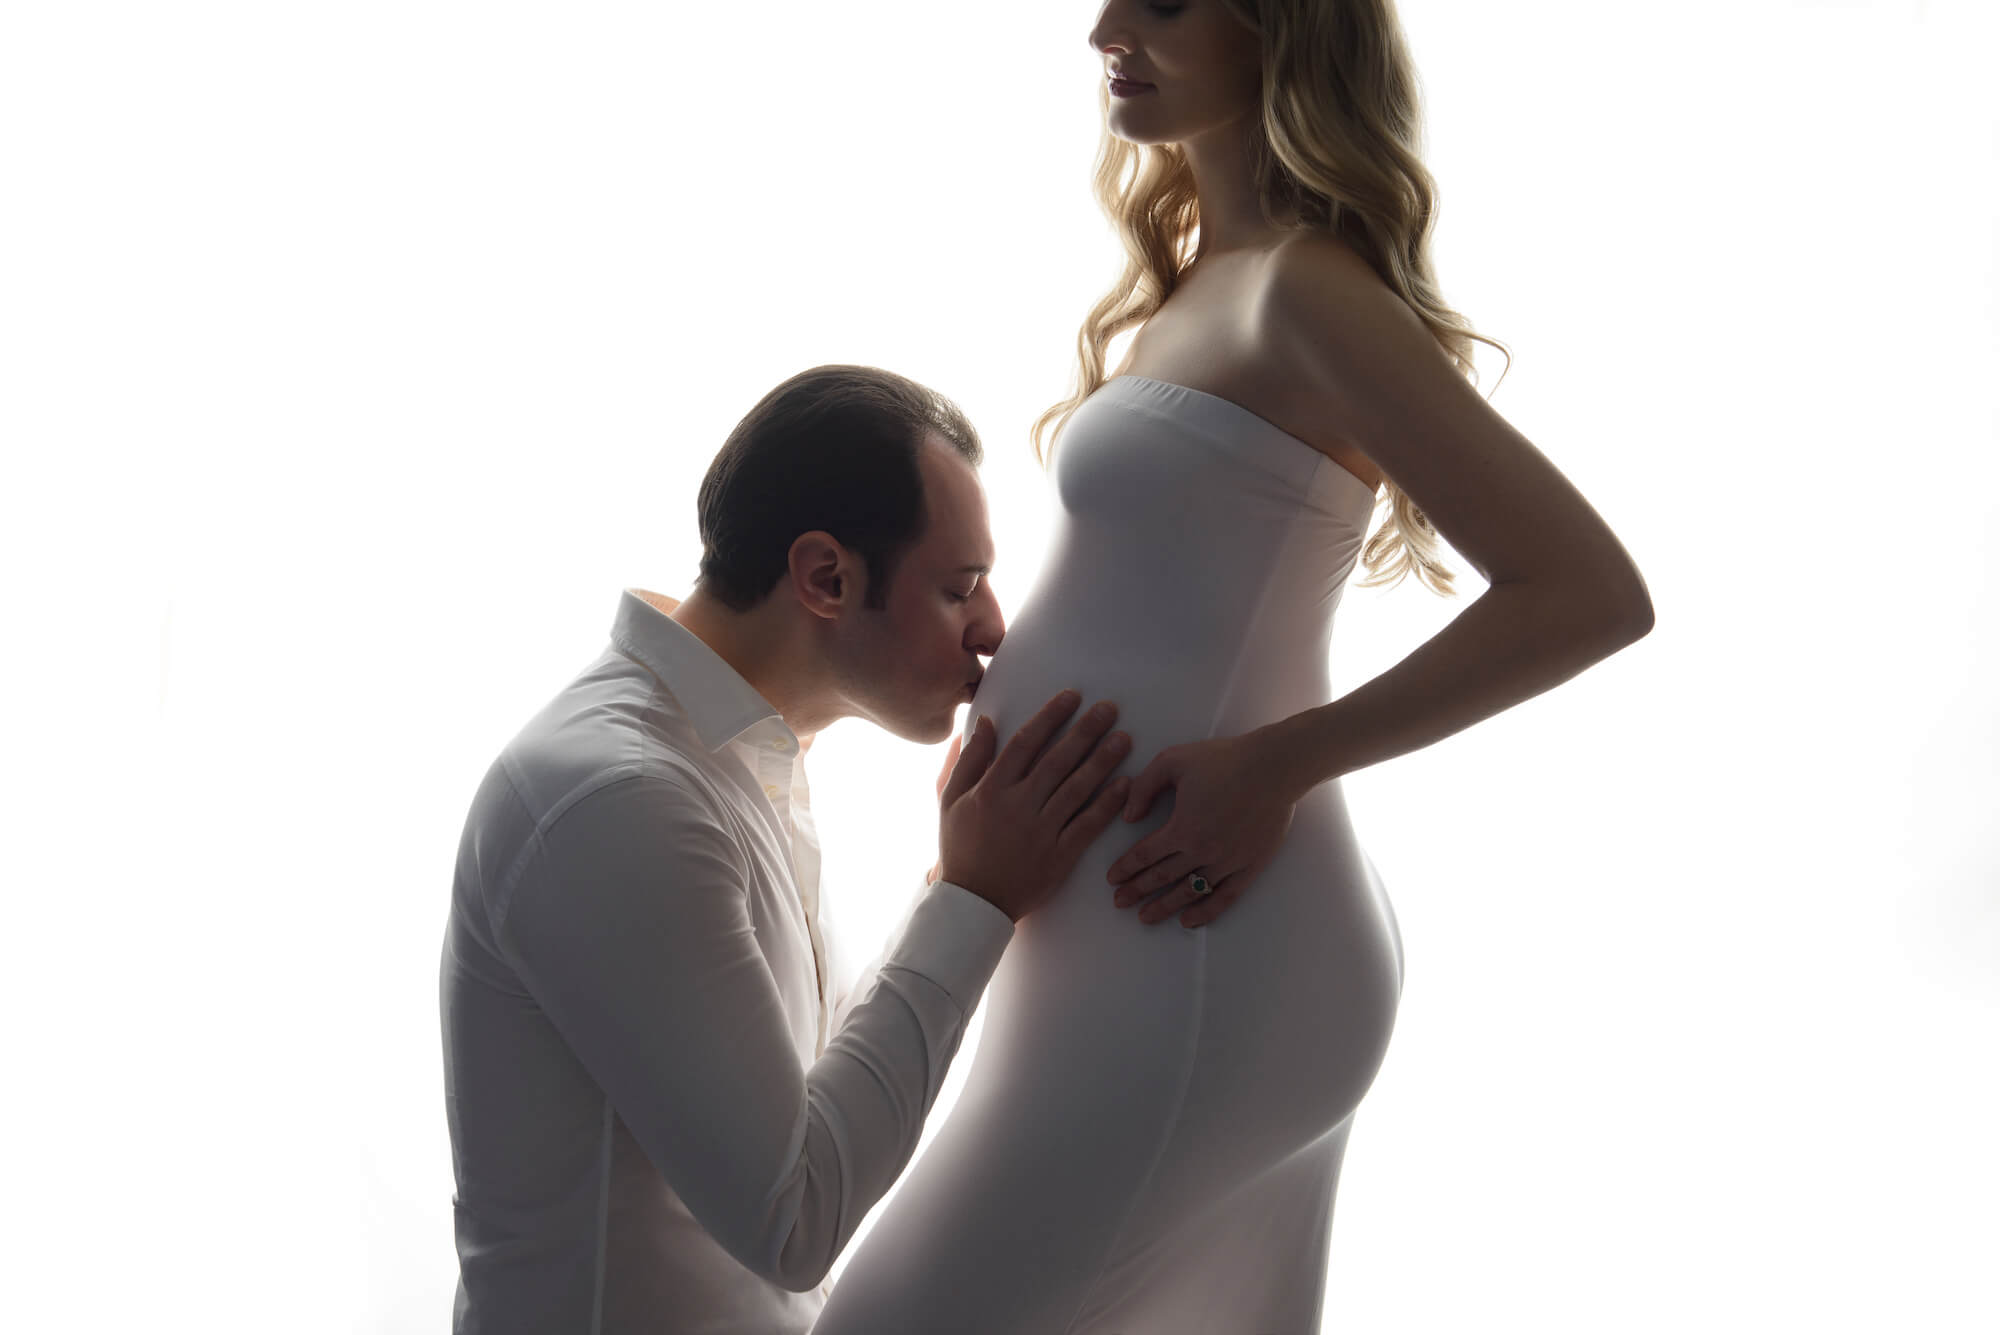 Maternity portrait on clean white background of couple. The man kneels down to kiss the woman's baby bump.